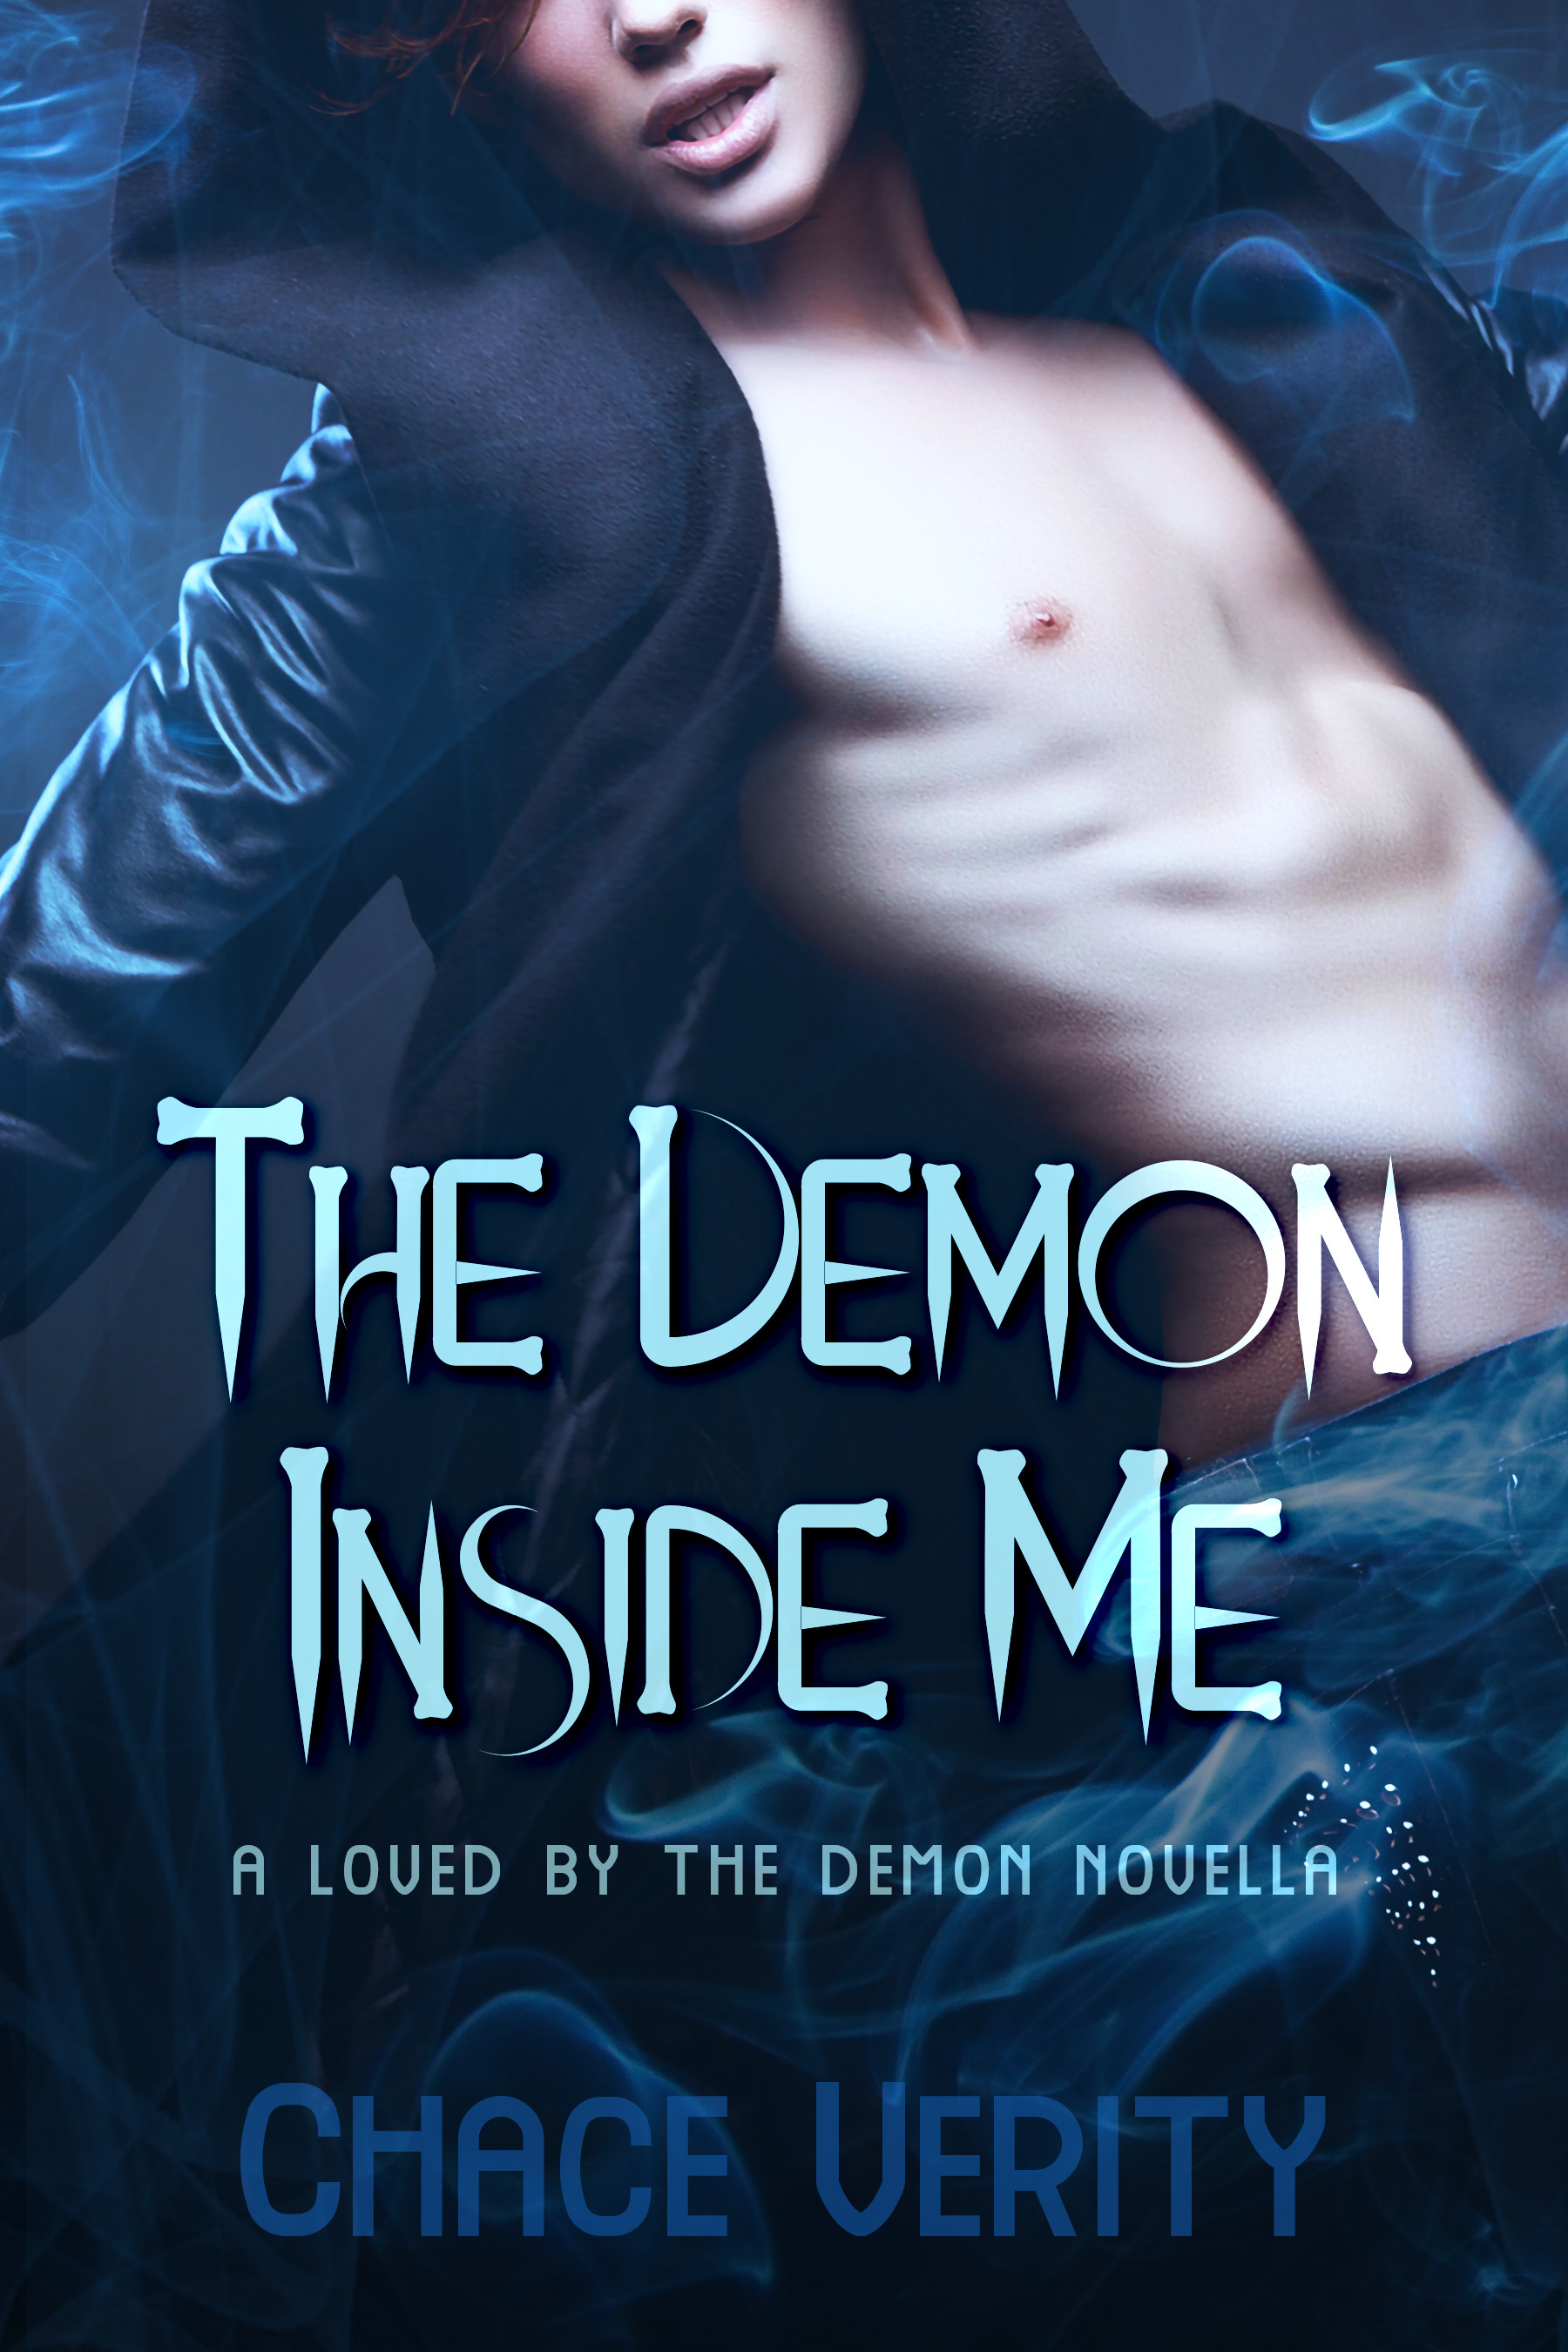 Cover for Chace Verity's <i>The Demon Inside Me</i> featuring a shirtless pale man wearing a hooded jacket surrounded by atmospheric smoke